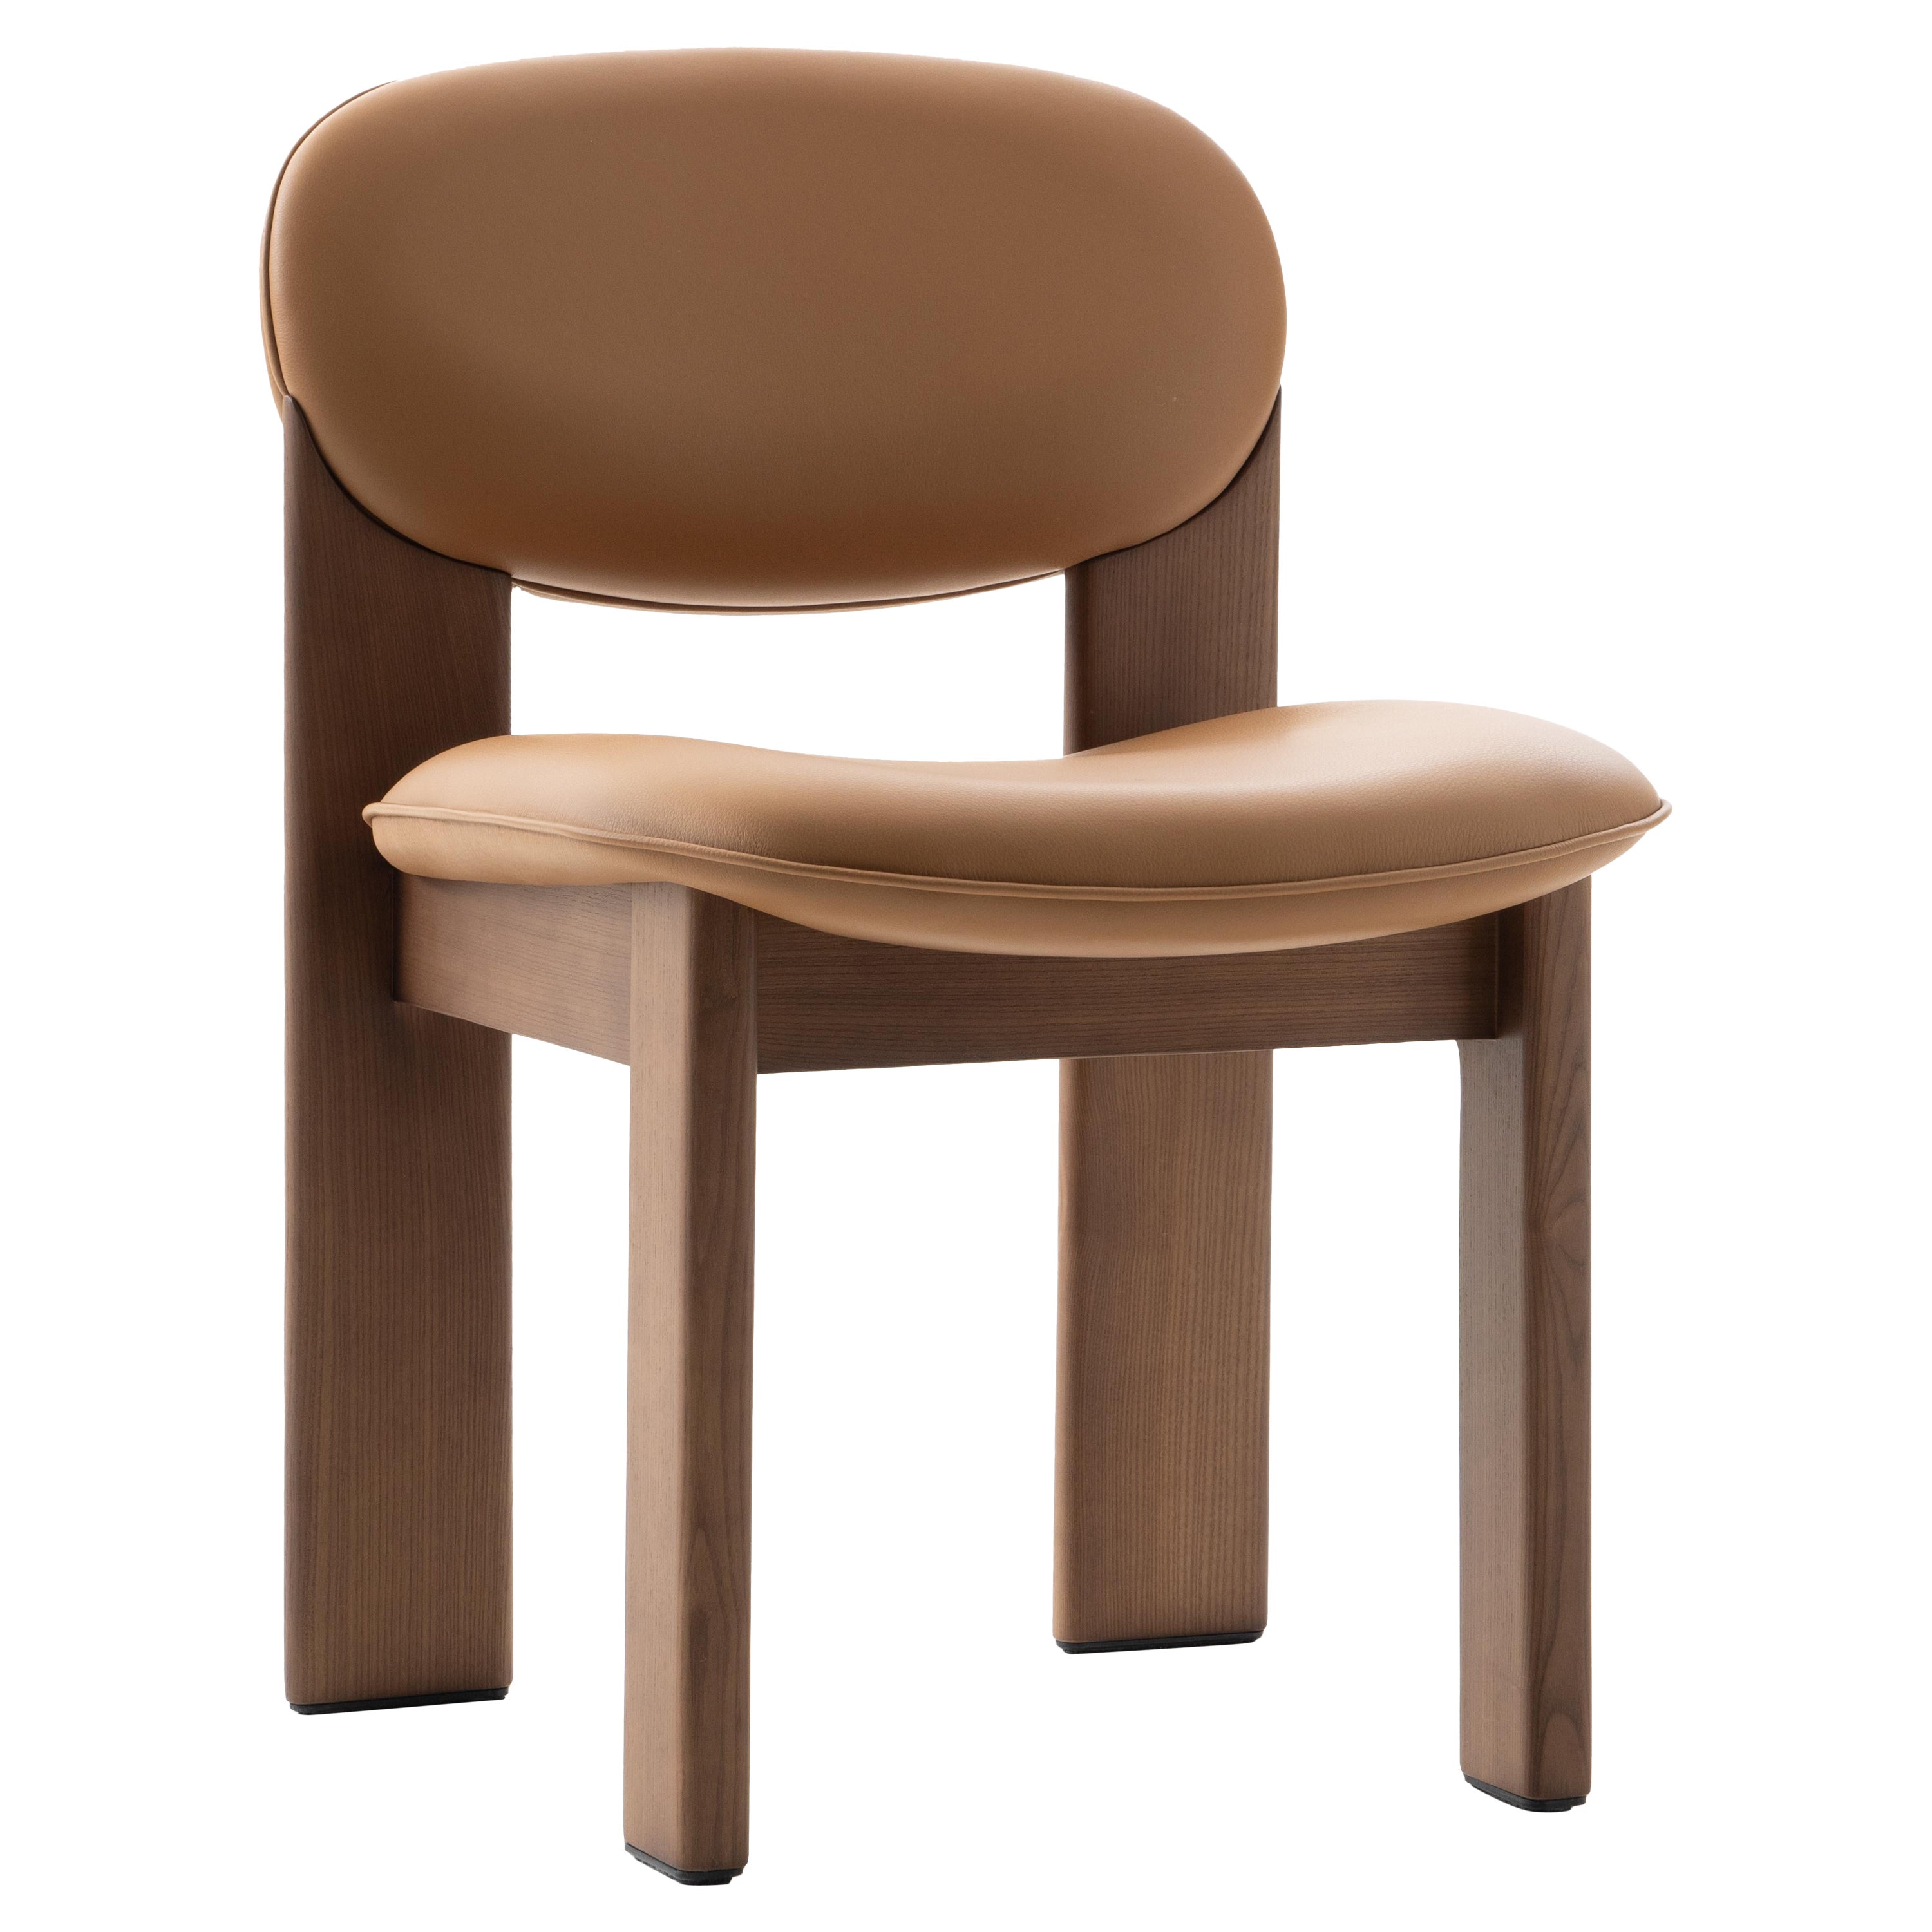 Contemporary Dining Chair 'Archipen' by Noom, Leather Cashmere, Biscotto For Sale